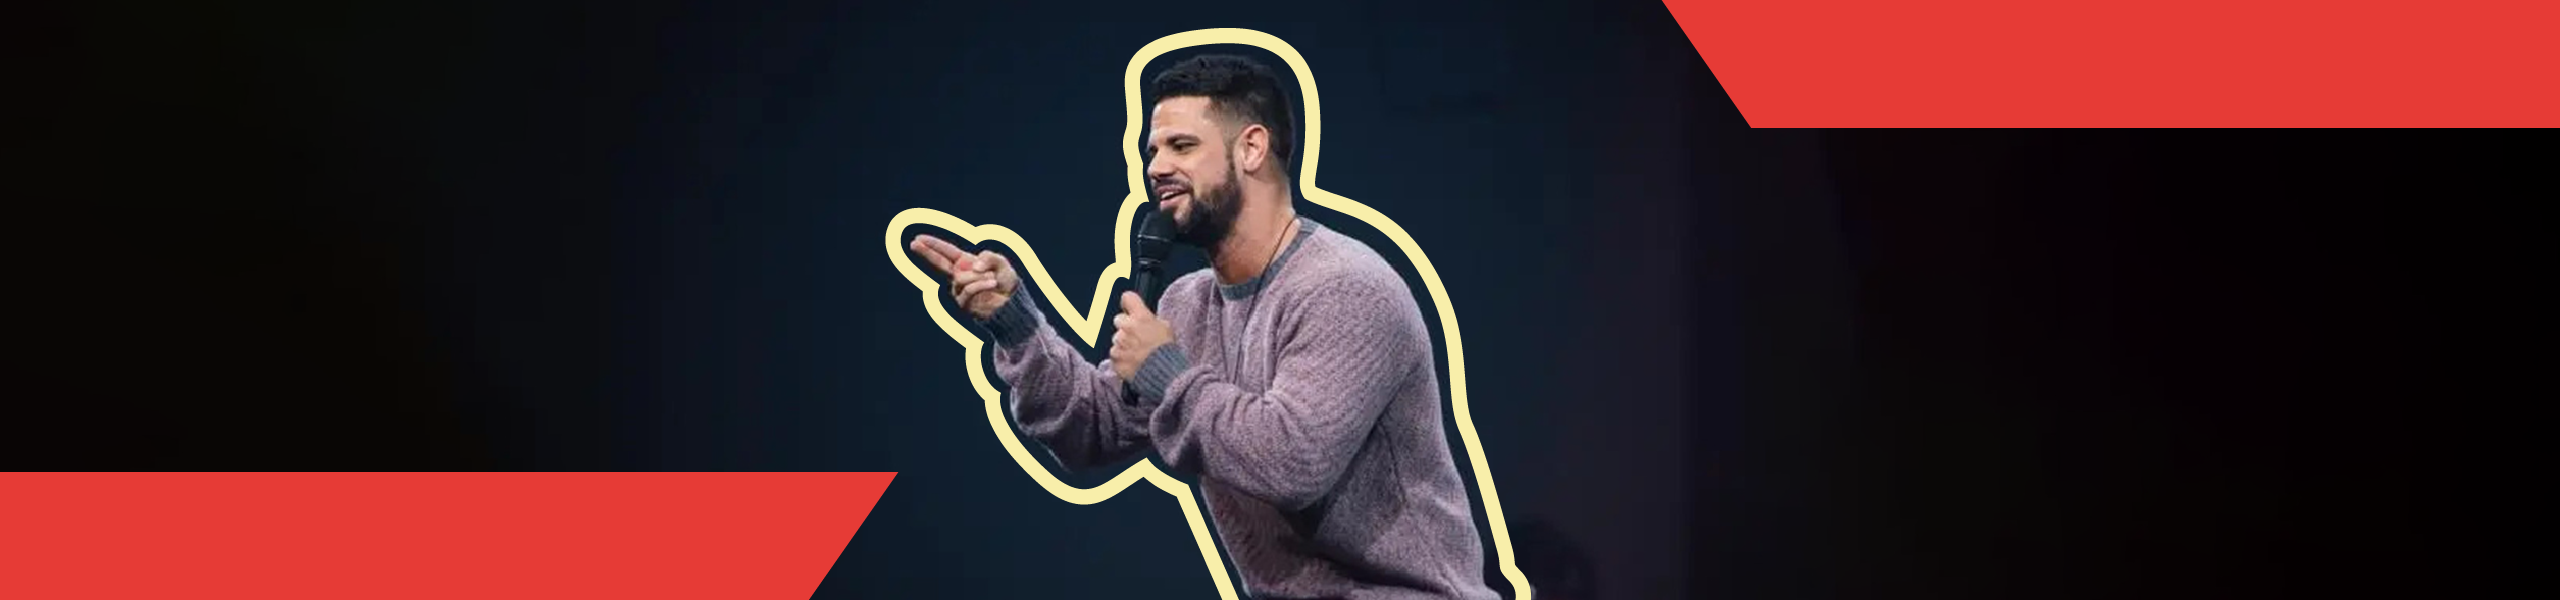 Marriage, Dating and Relationships | Steven Furtick